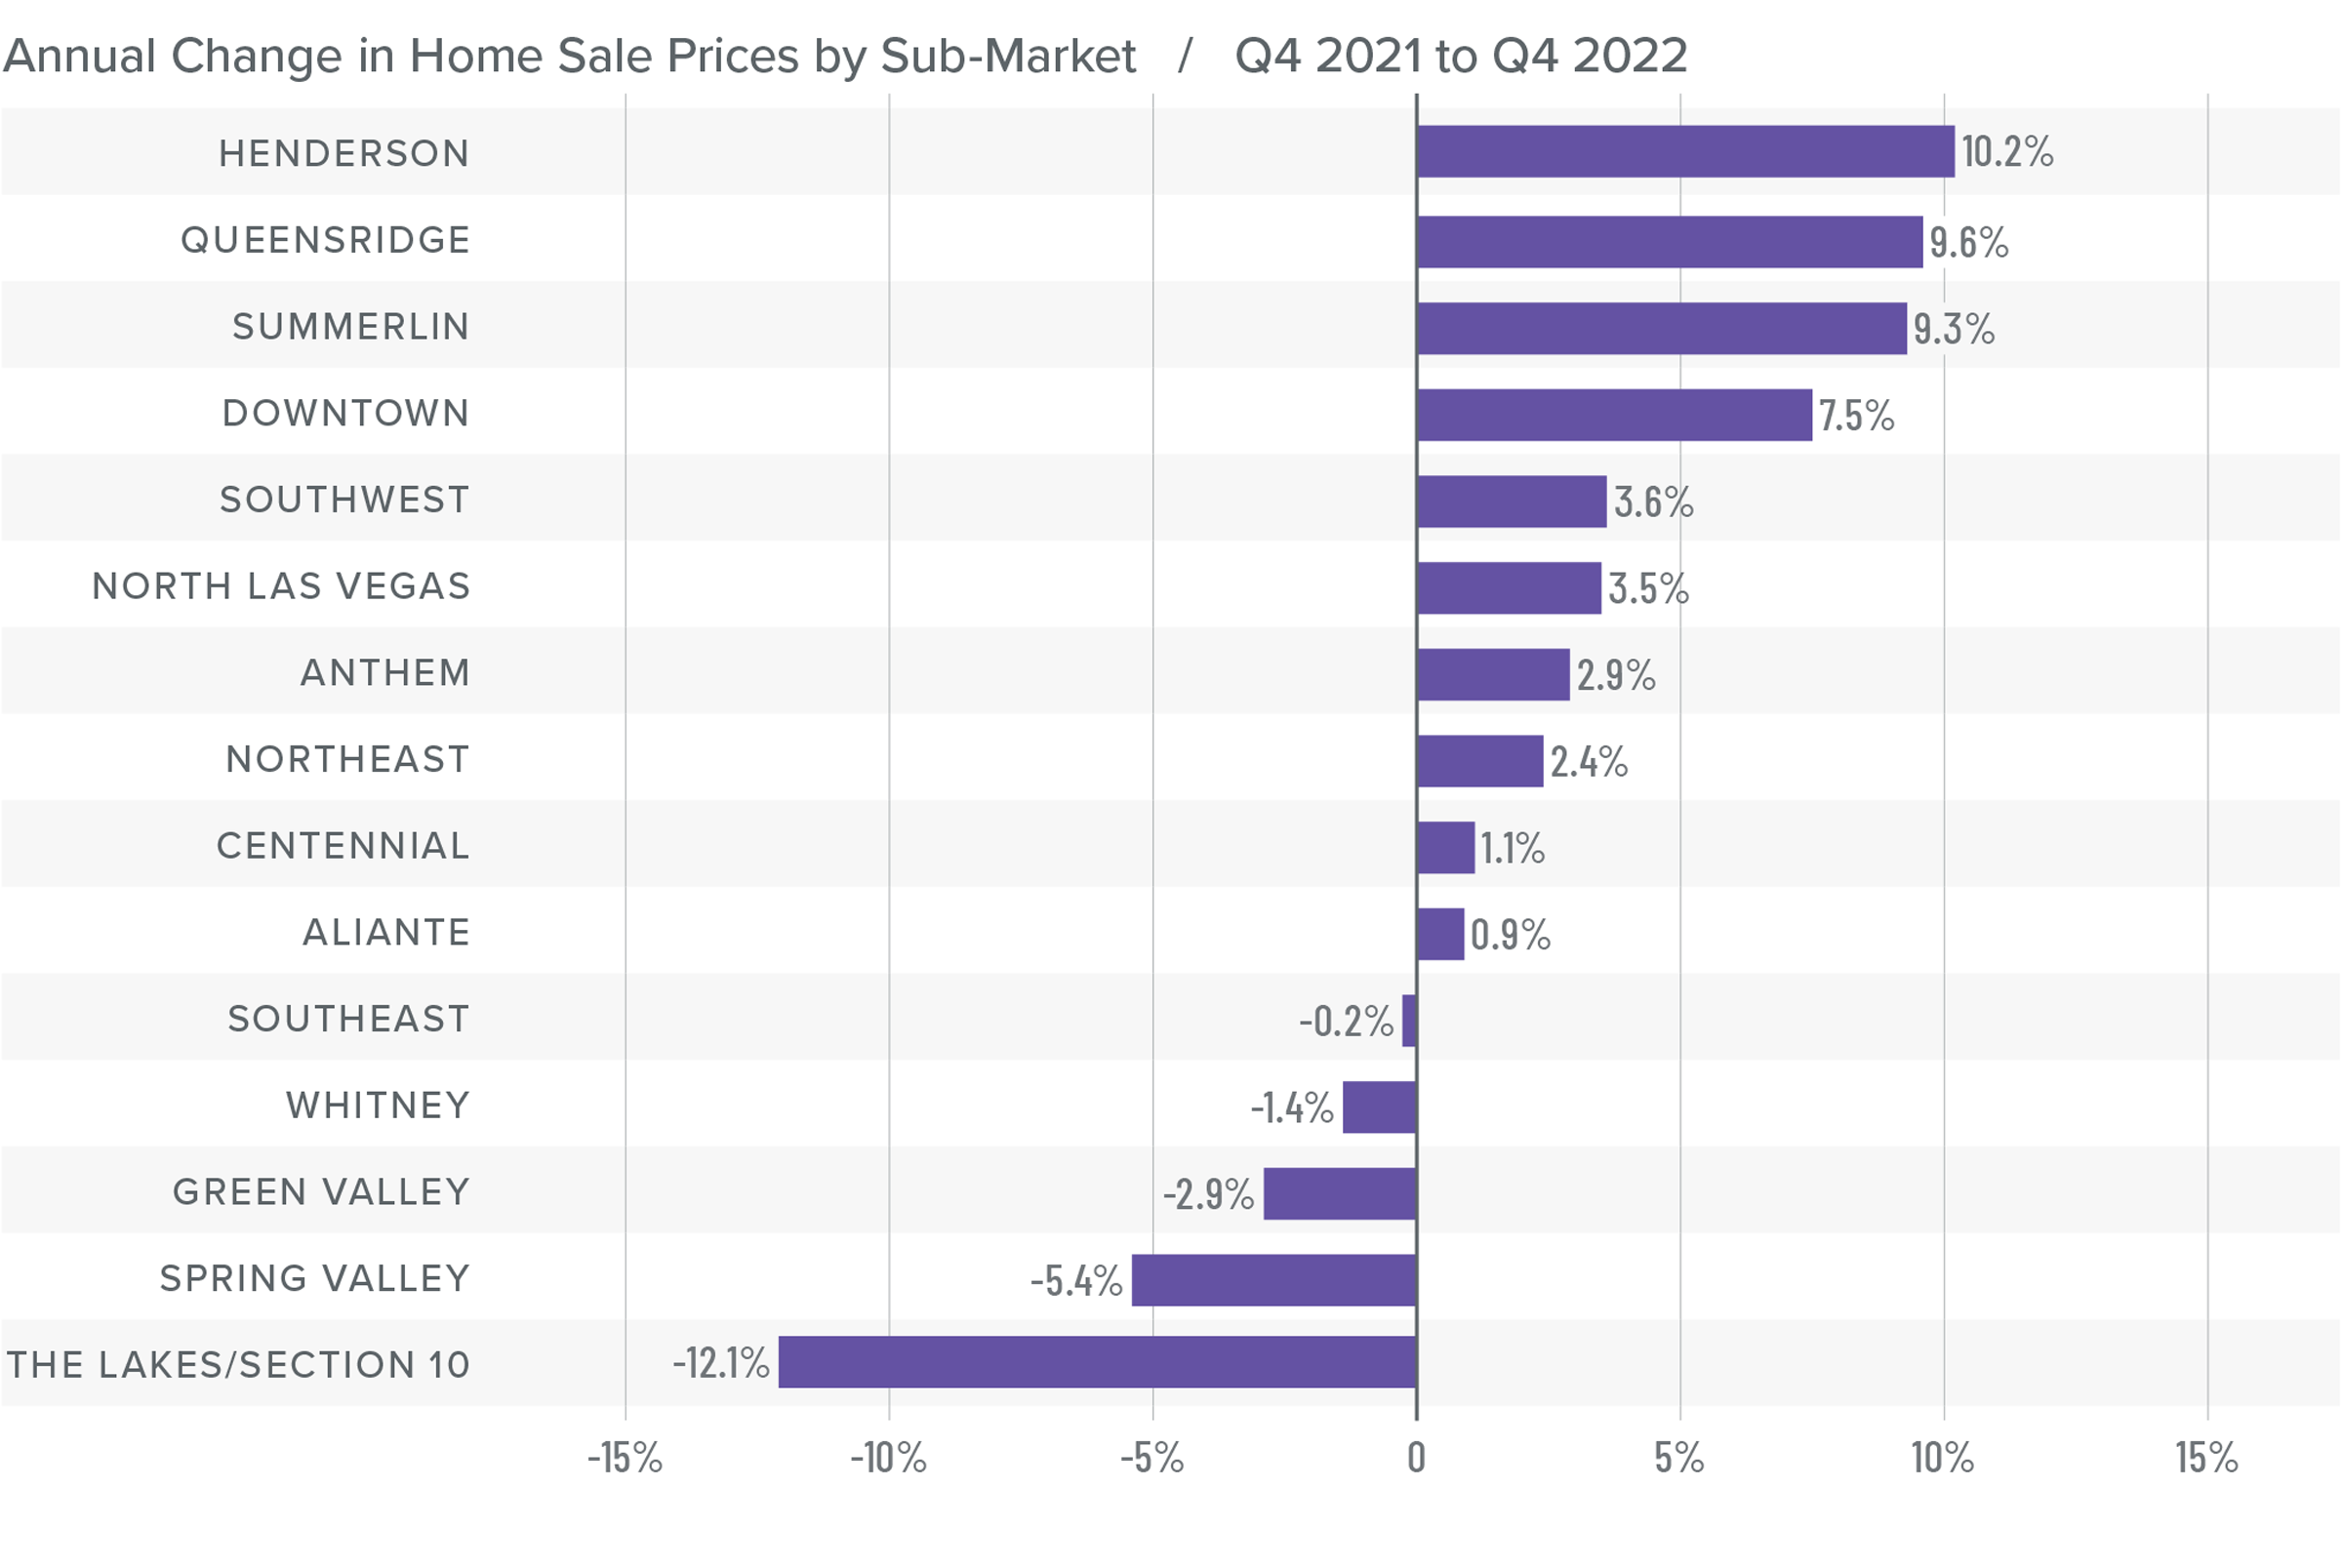 A bar graph showing the annual change in home sale prices for various sub-markets in Nevada from Q4 2021 to Q4 2022. Henderson tops the list at 10.2%, followed by Queensridge at 9.6%, Summerlin at 9.3%, Downtown at 7.5%, Southwest at 3.6%, North Las Vegas at 3.5%, Anthem at 2.9%, Northeast at 2.4%, Centennial at 1.1%, Aliante at 0.9%, Southeast at -0.2%, Whitney at -1.4%, Green Valley at -2.9%, Spring Valley at -5.4%, and The Lakes/Section 10 at -12.1%.